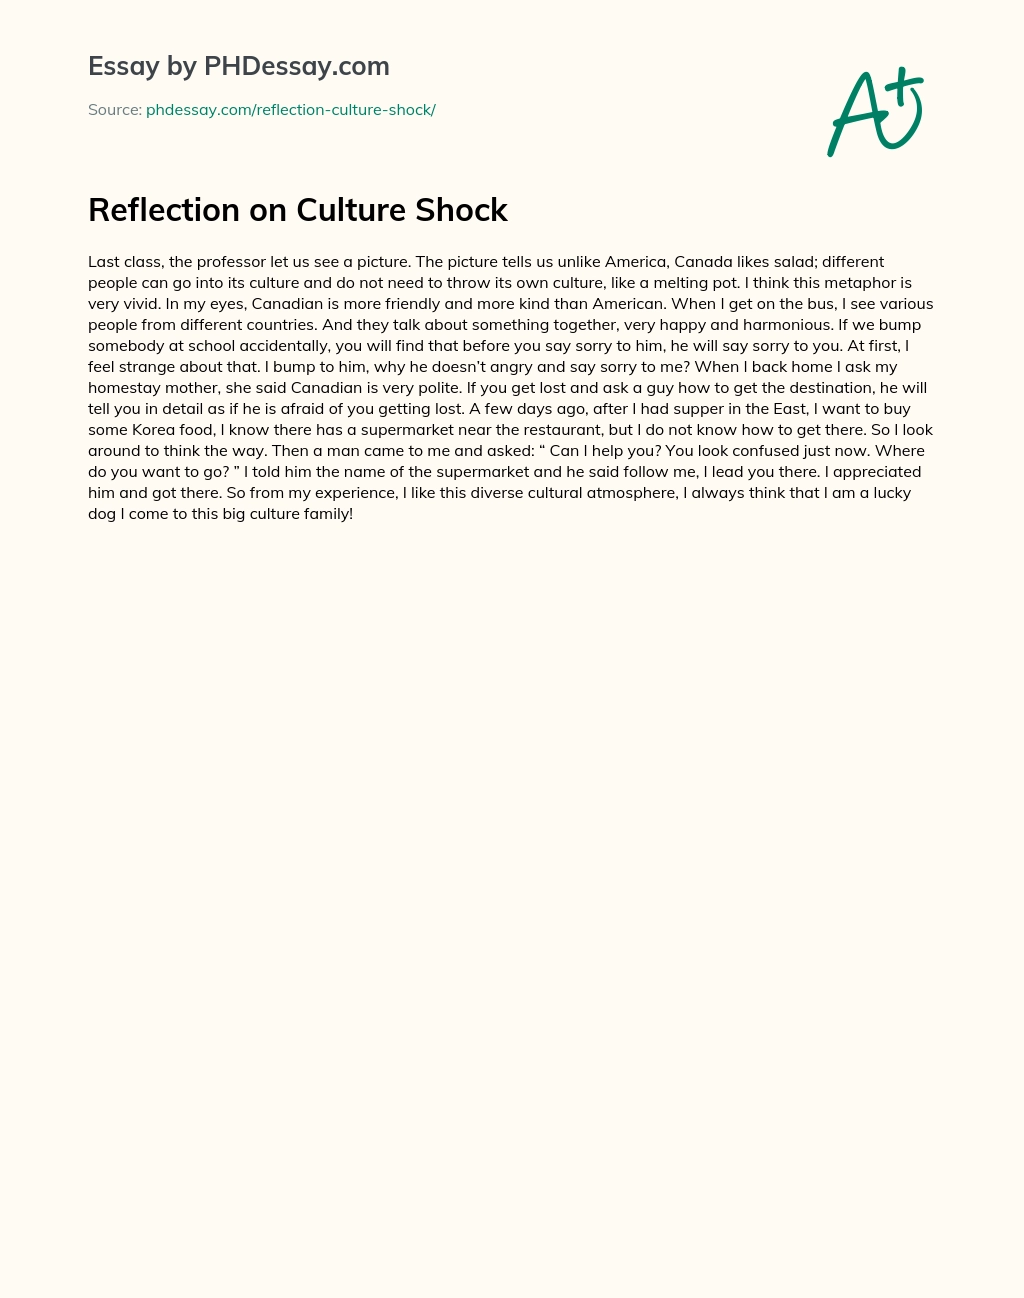 Reflection on Culture Shock essay